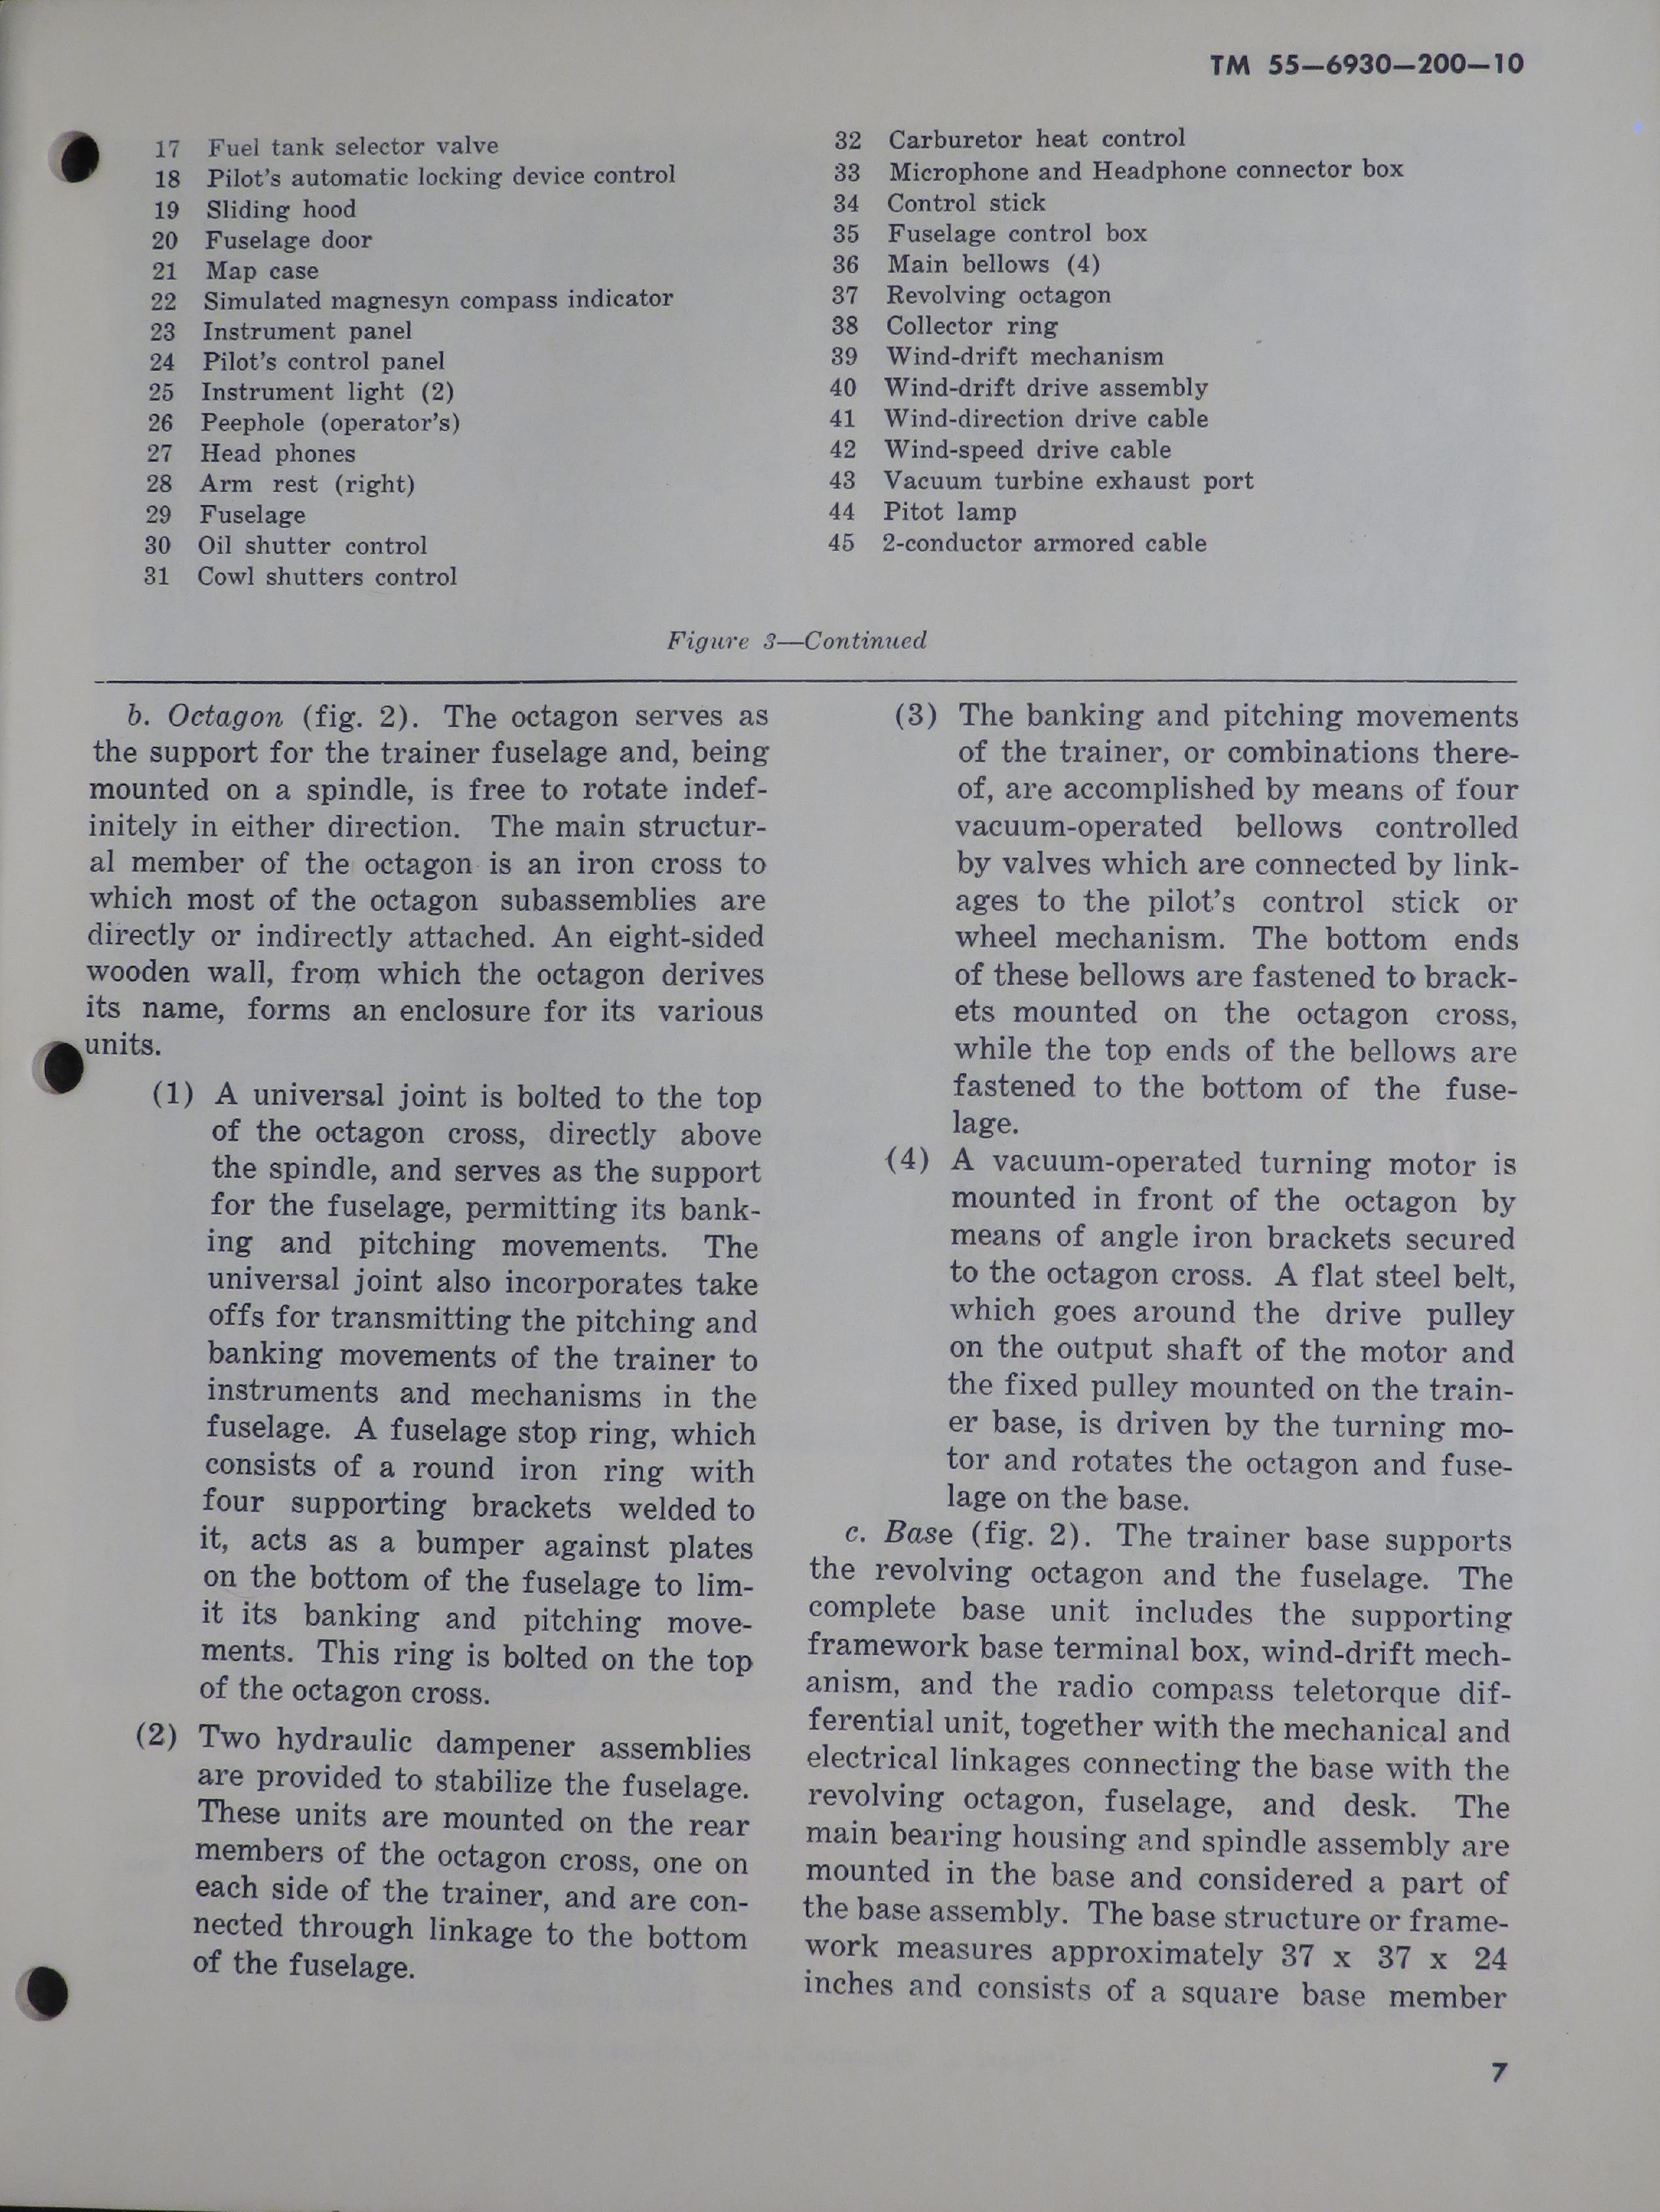 Sample page 7 from AirCorps Library document: Operator's Manual for Basic Instrument Trainer 45 Device 1-CA-1